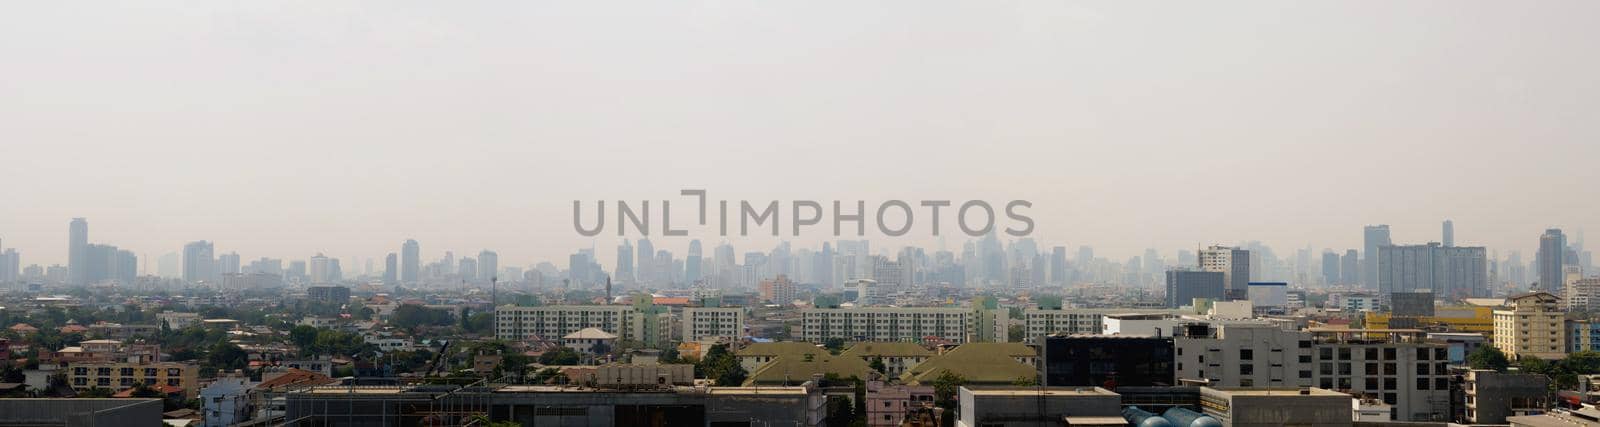 Cityscape urban skyline in the mist or smog. Wide and High view image of Bangkok city in the smog by Satakorn